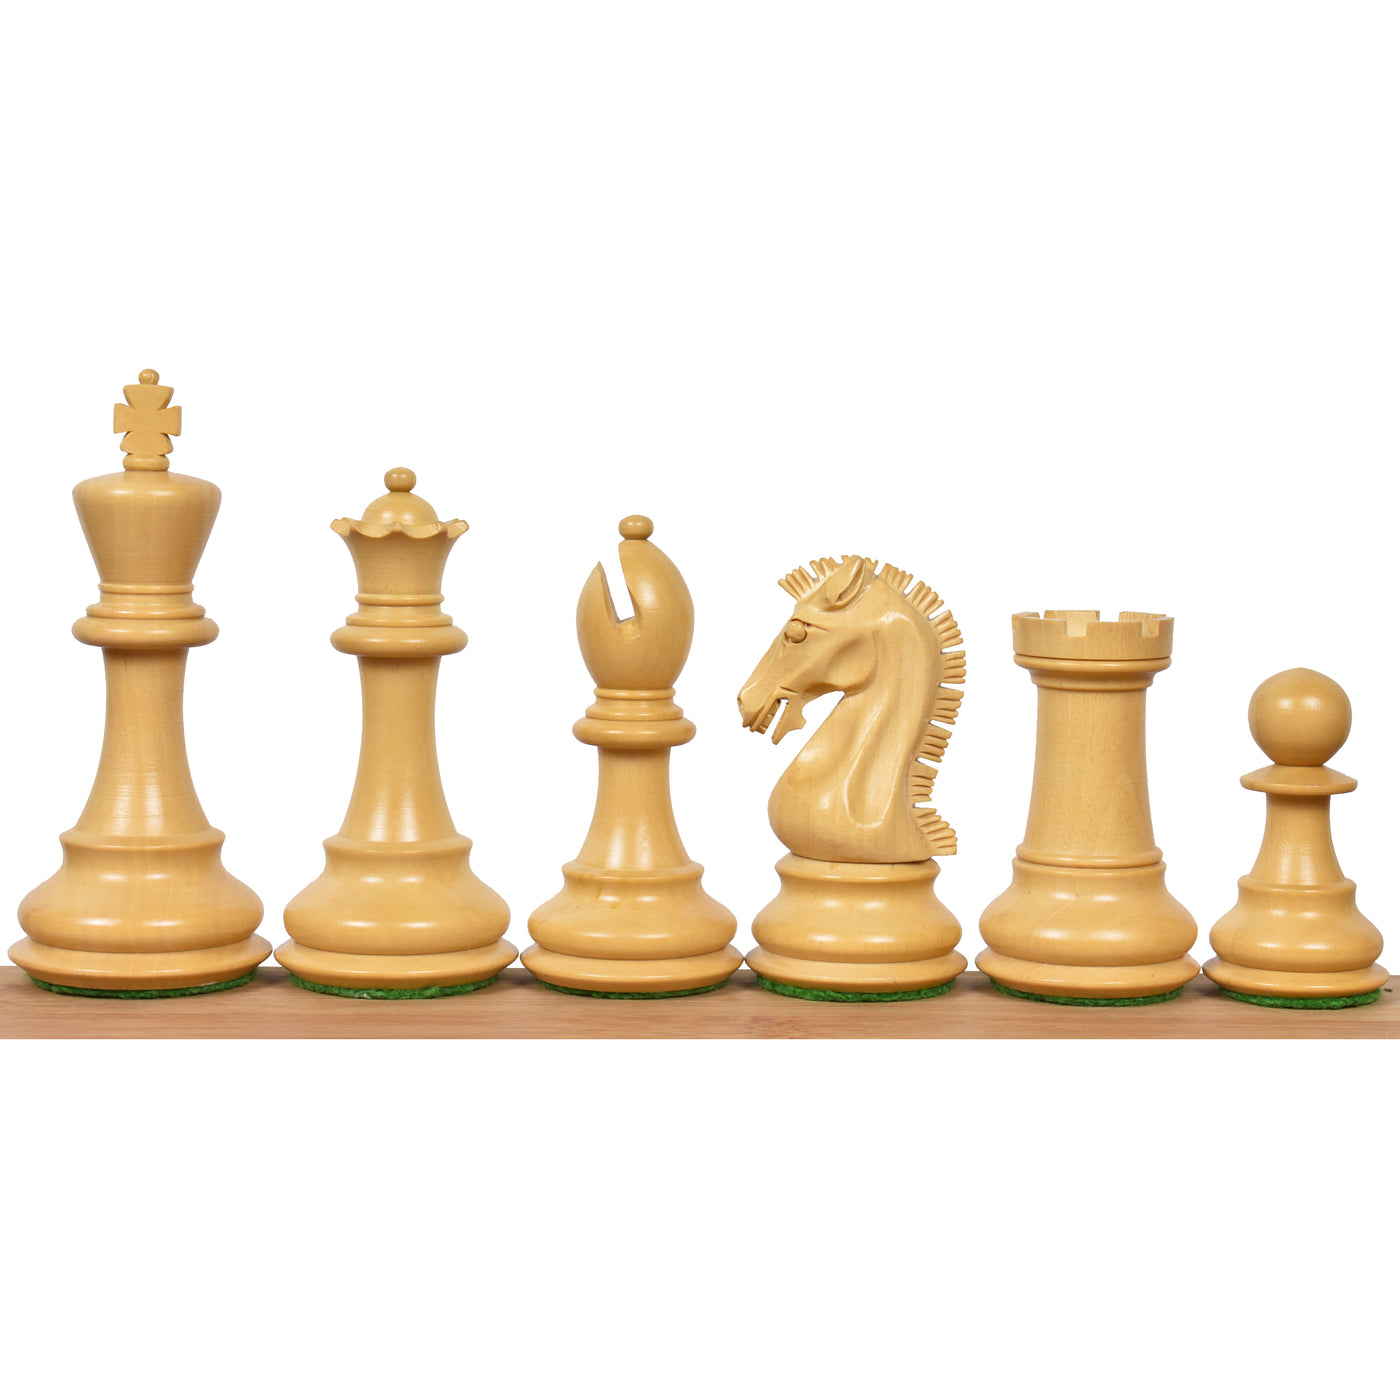 3.9" Craftsman Series Staunton Chess Set Combo - Pieces in Rosewood With 21" Chess board and Leatherette Coffer Storage Box